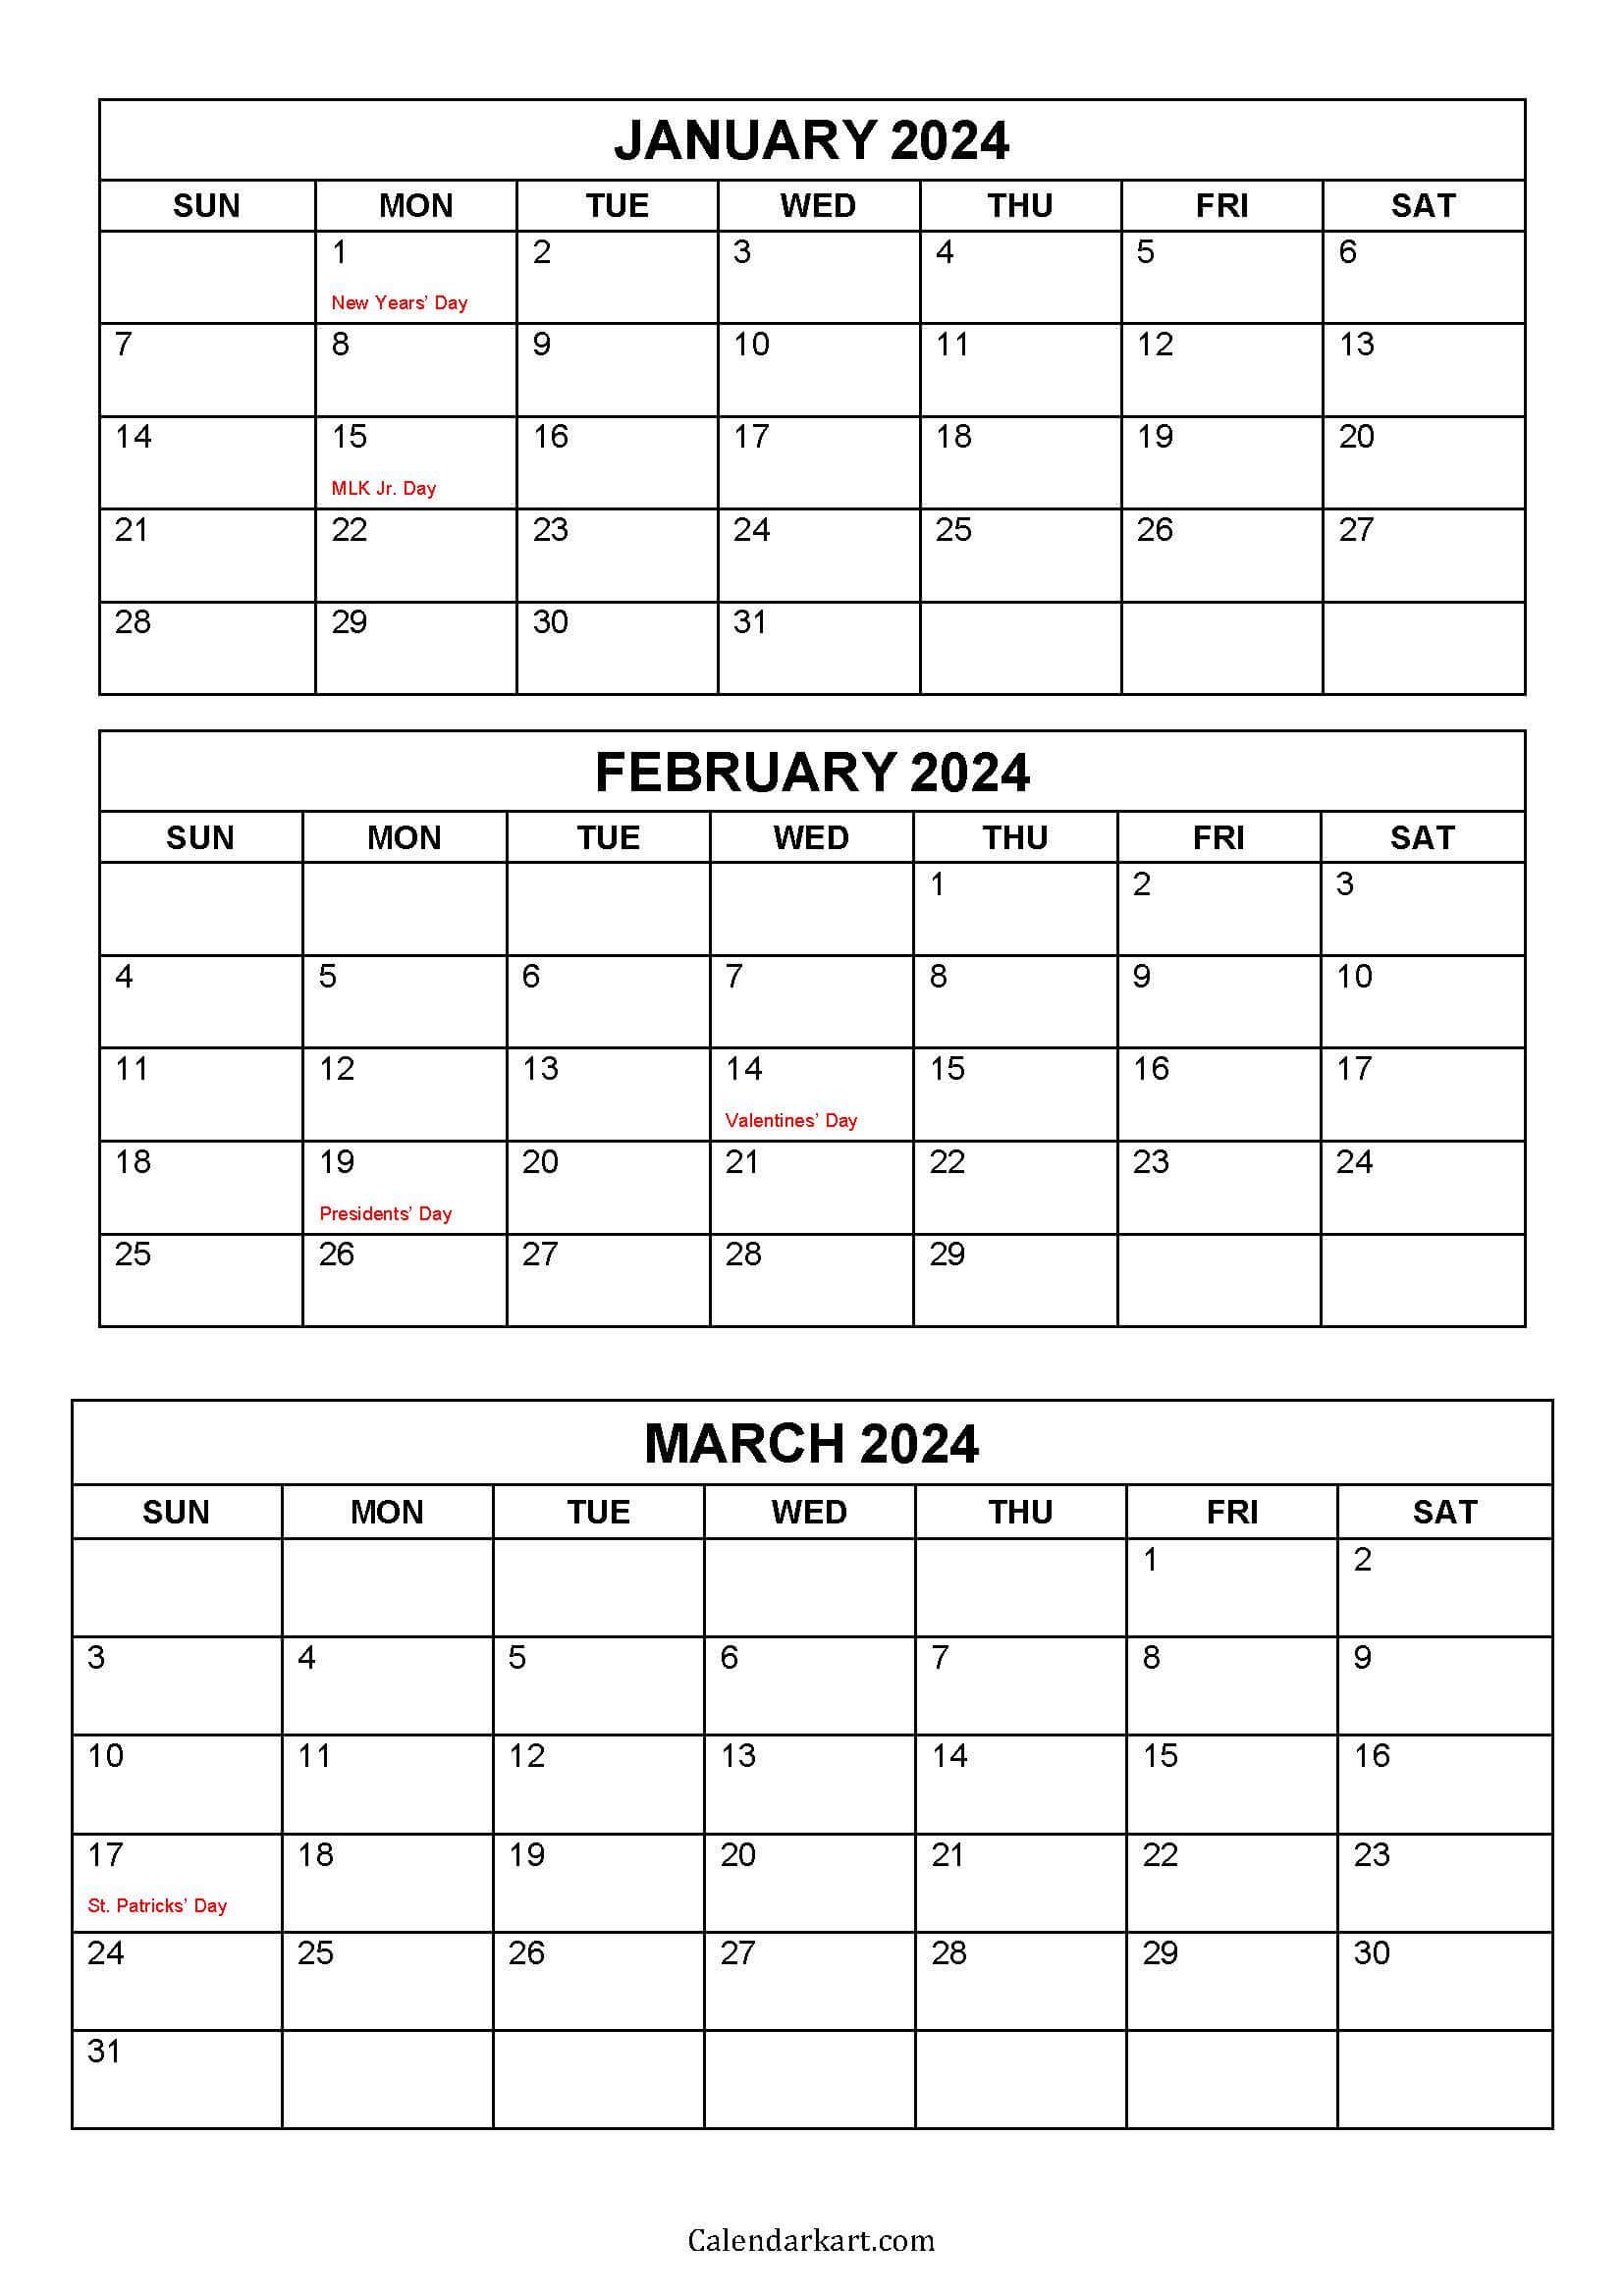 Free Printable January To March 2024 Calendar - Calendarkart | Free Printable Quarterly Calendar 2024